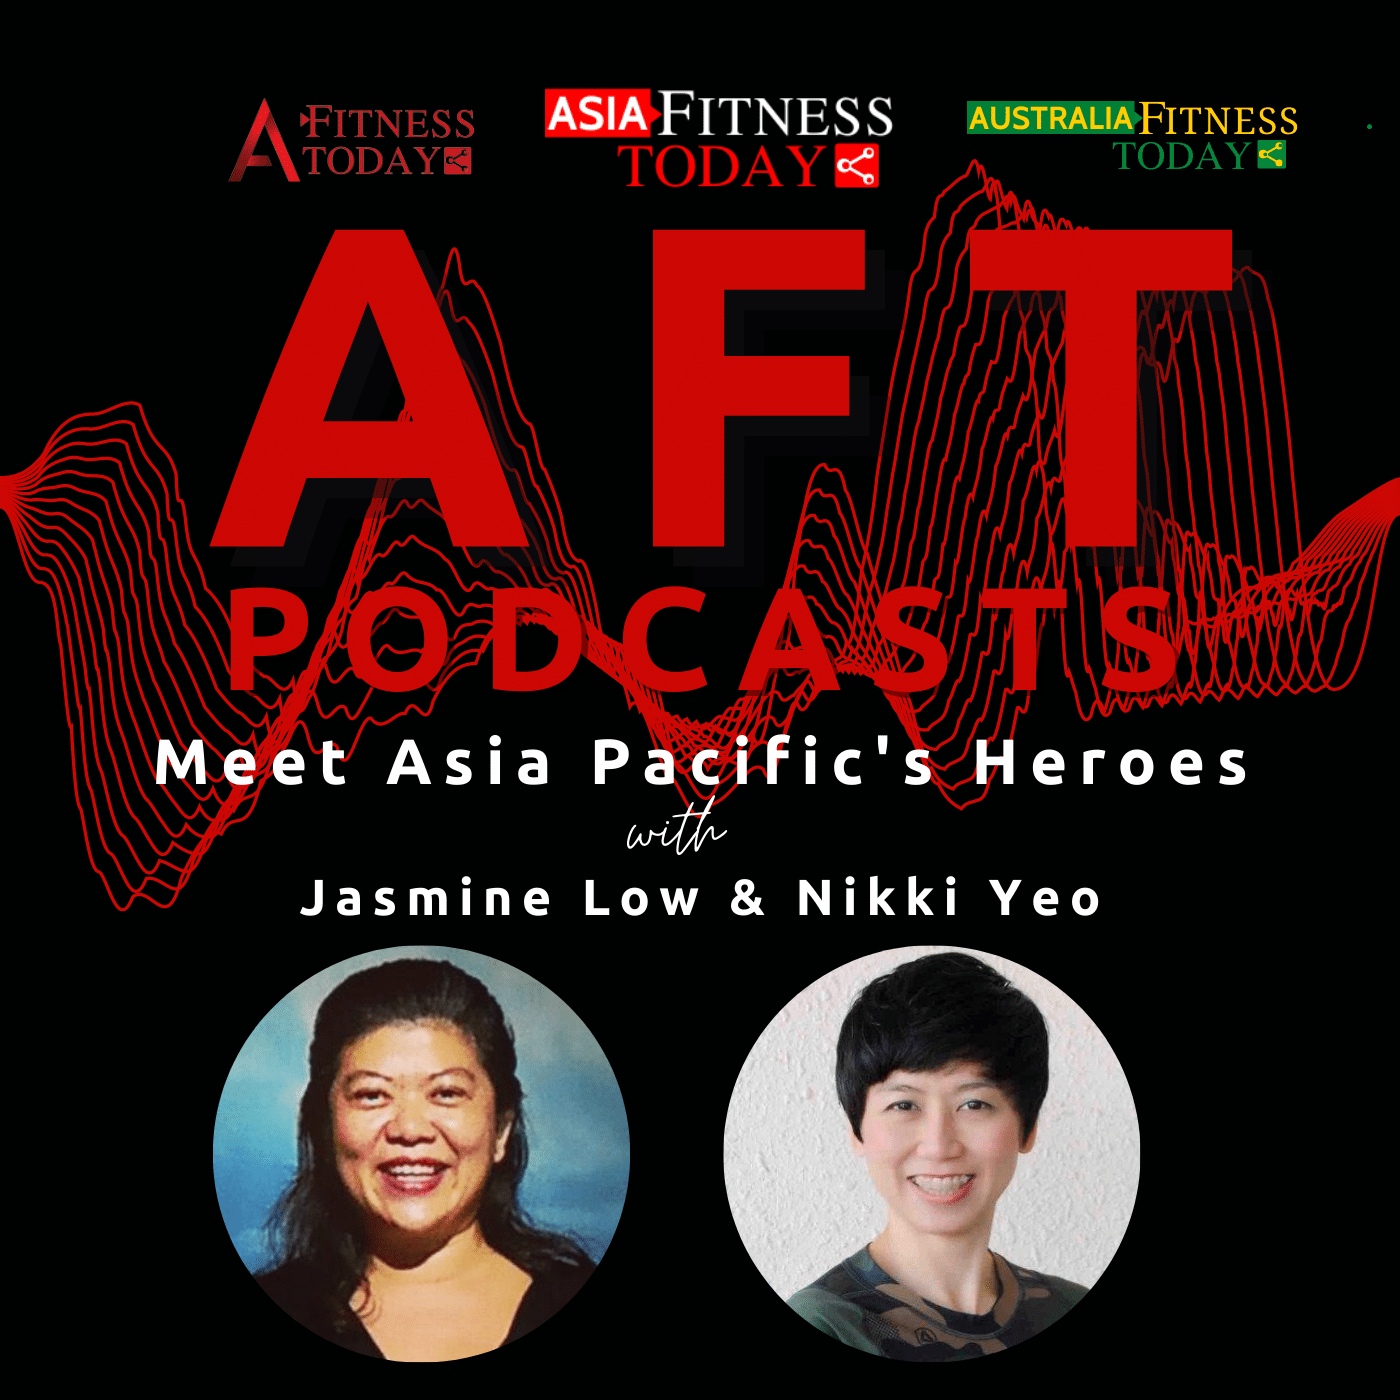 Listen by Heart Podcast Cover featuring co hosts, Jasmine H. Low and Nikki Yeo